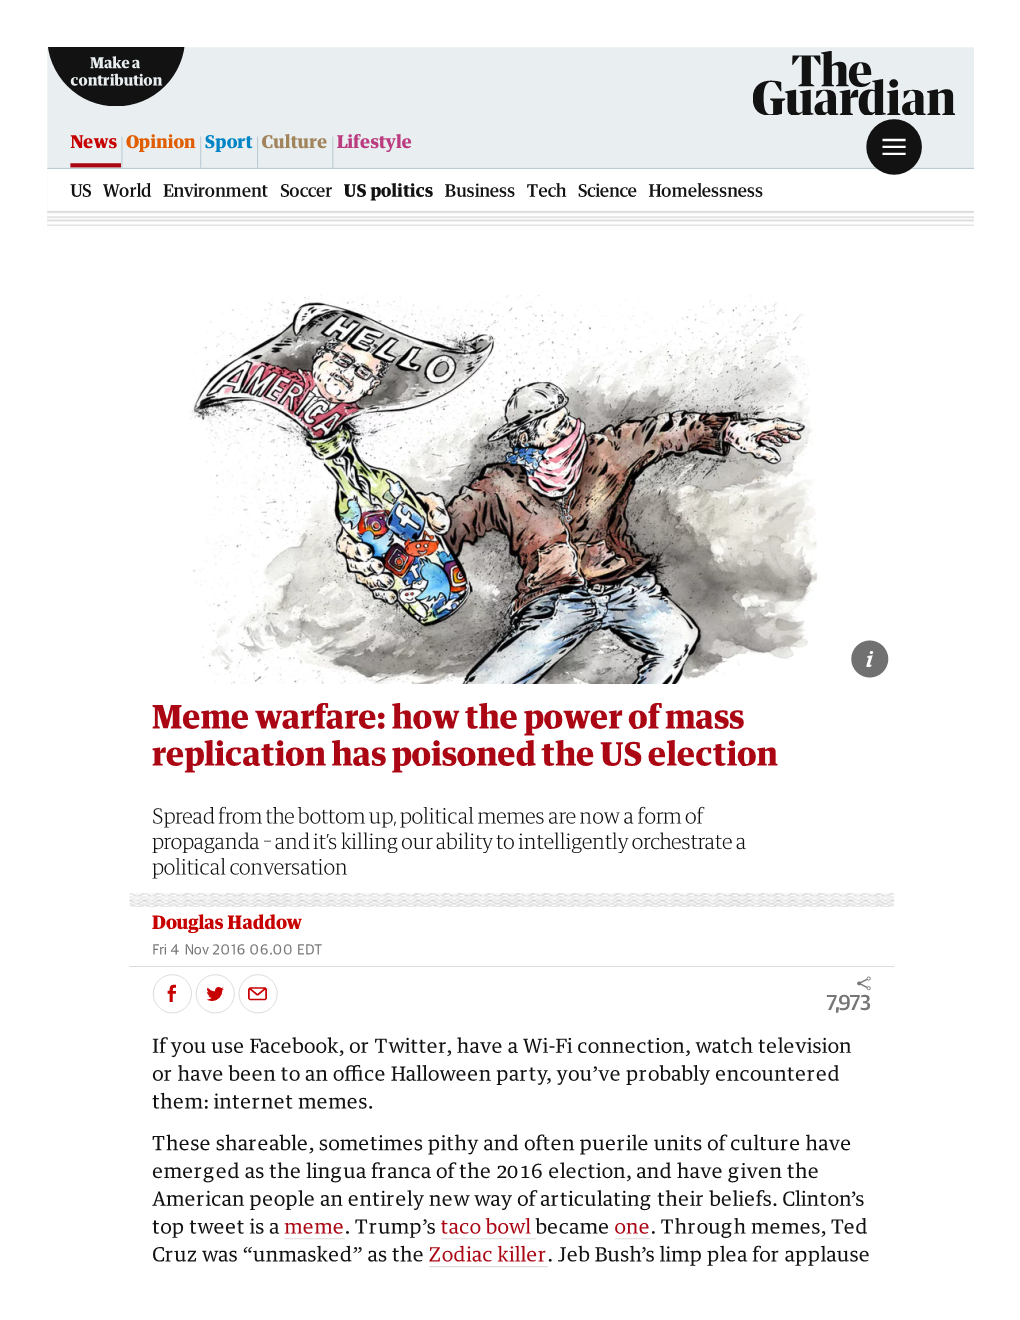 Meme Warfare: How the Power of Mass Replication Has Poisoned the US Election